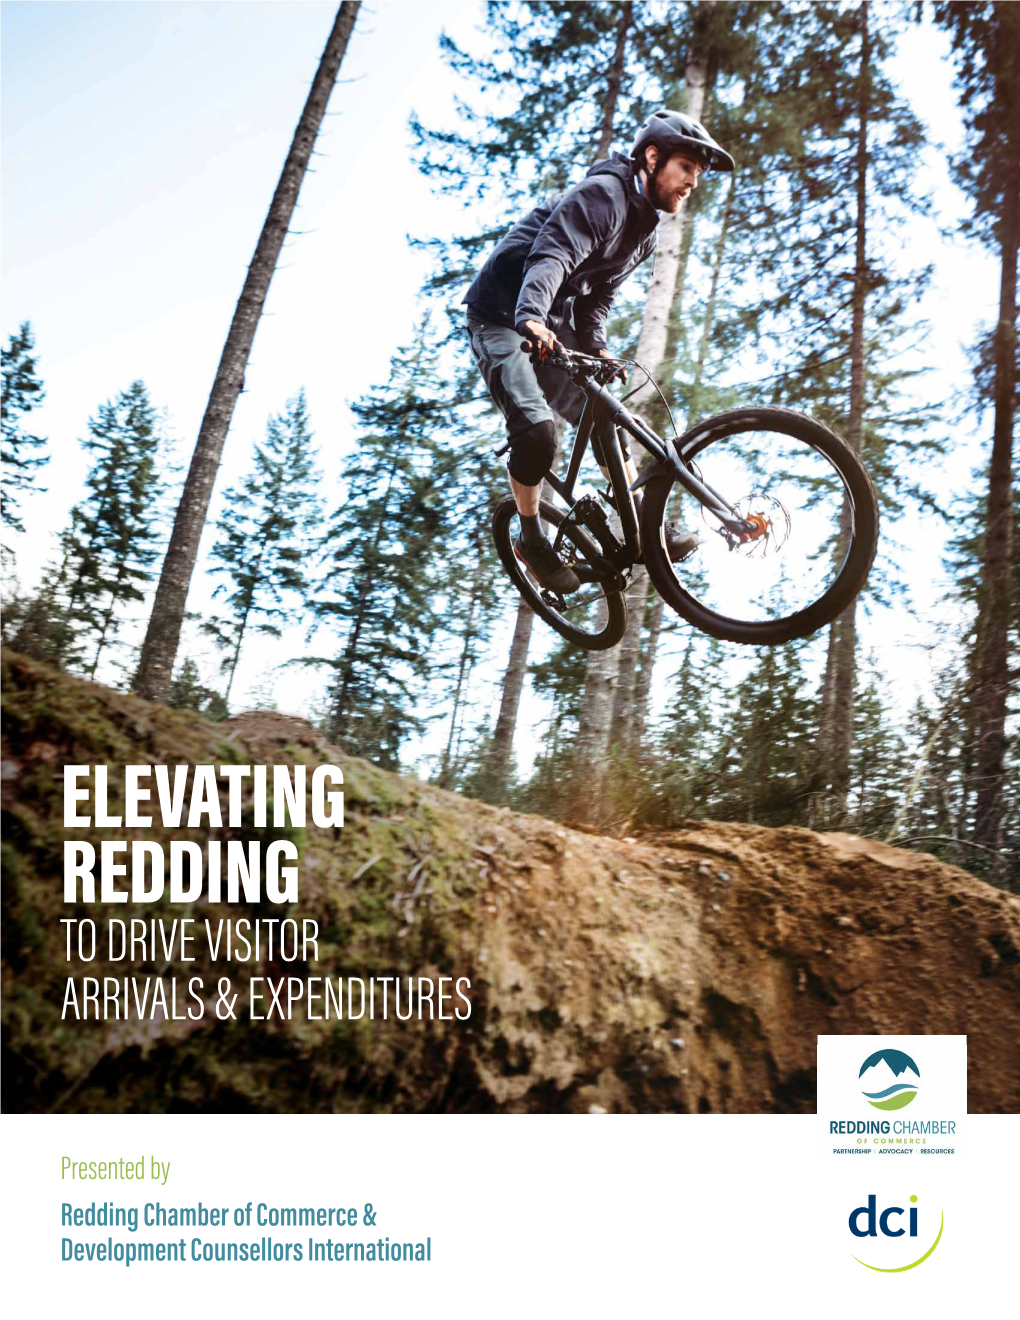 Elevating Redding to Drive Visitor Arrivals & Expenditures